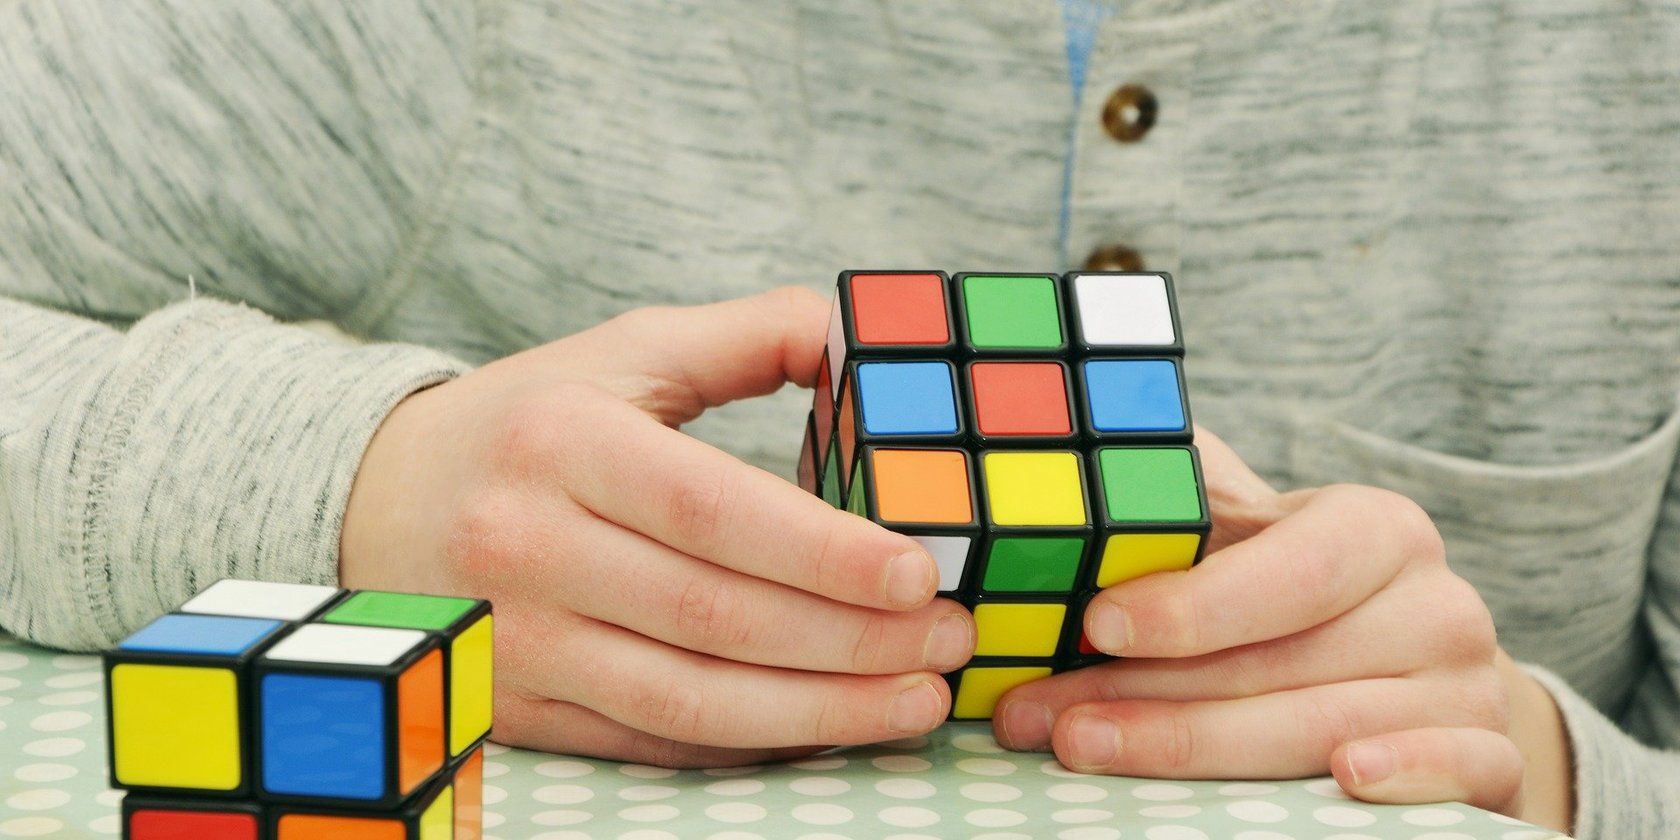 Person solving a rubiks cube